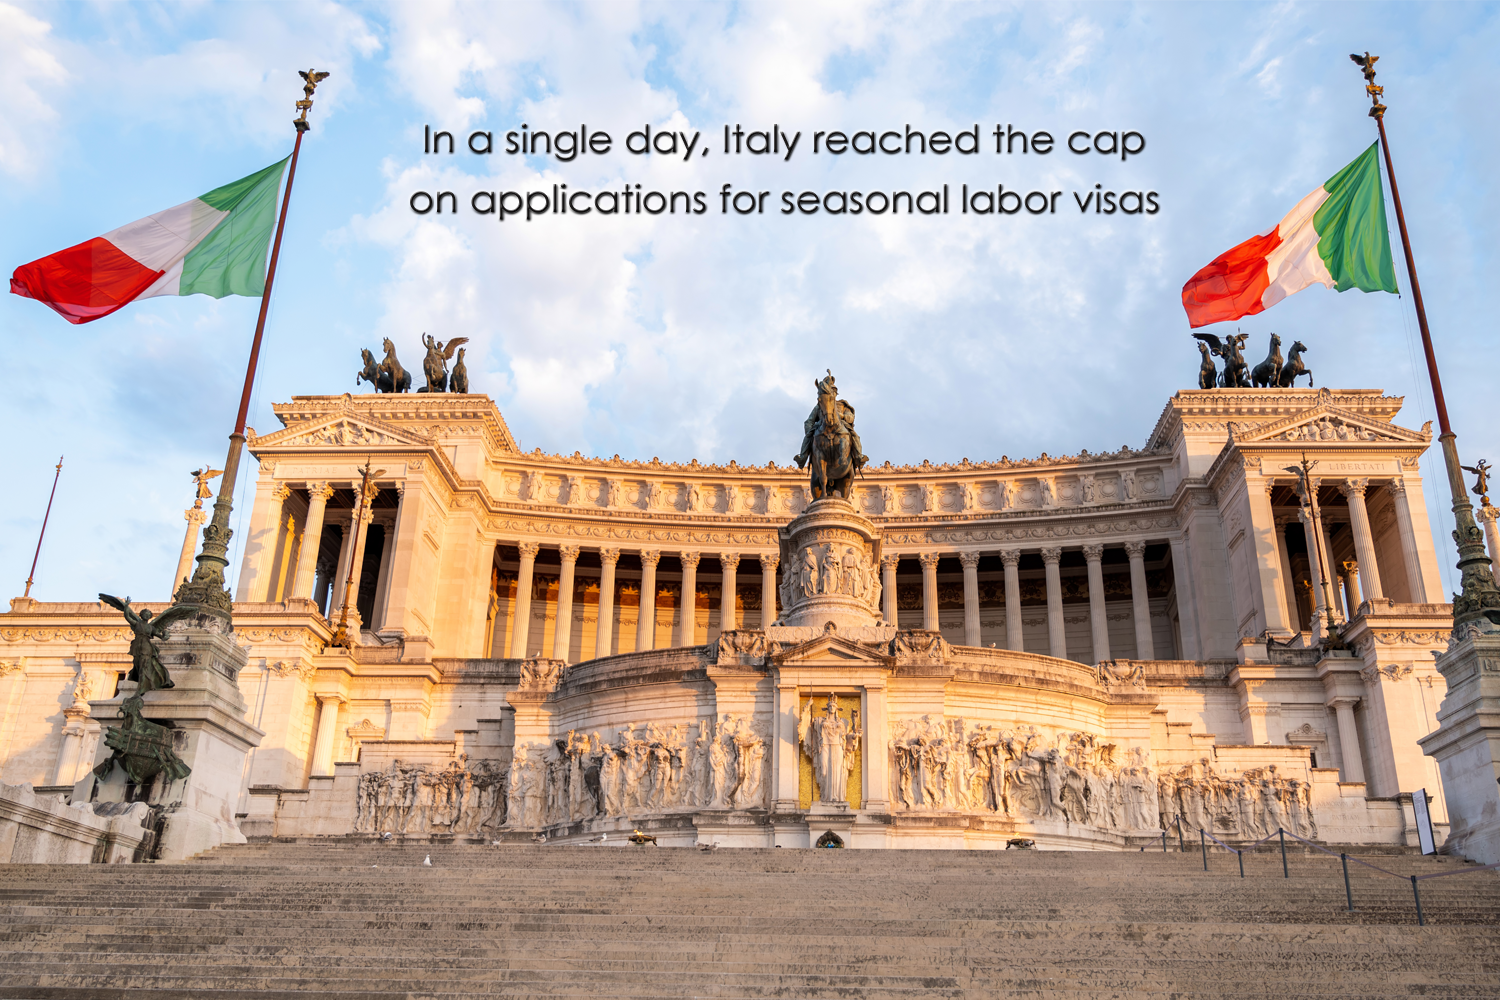 In a single day, Italy reached the cap on applications for seasonal labor visas.